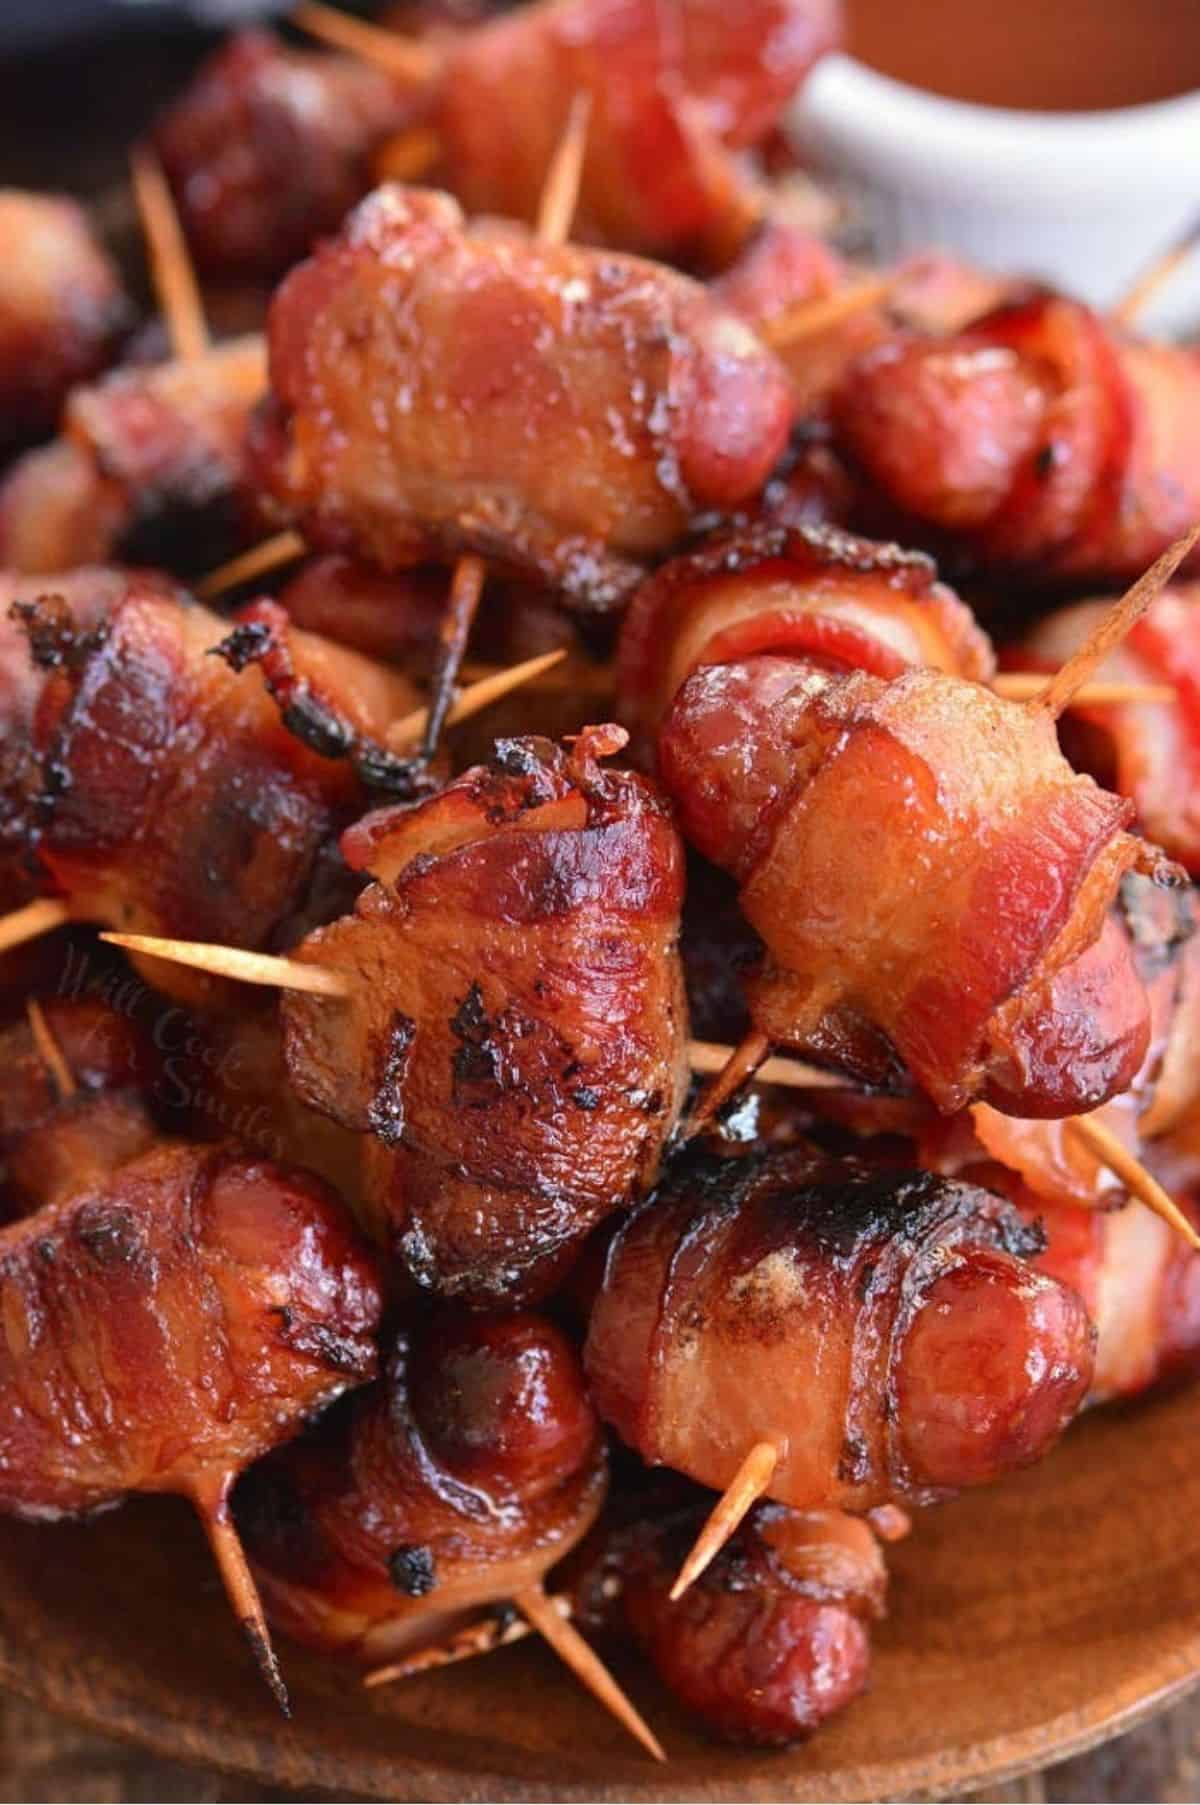 crispy bacon wrapped little smokies sausages on a wooden plate.